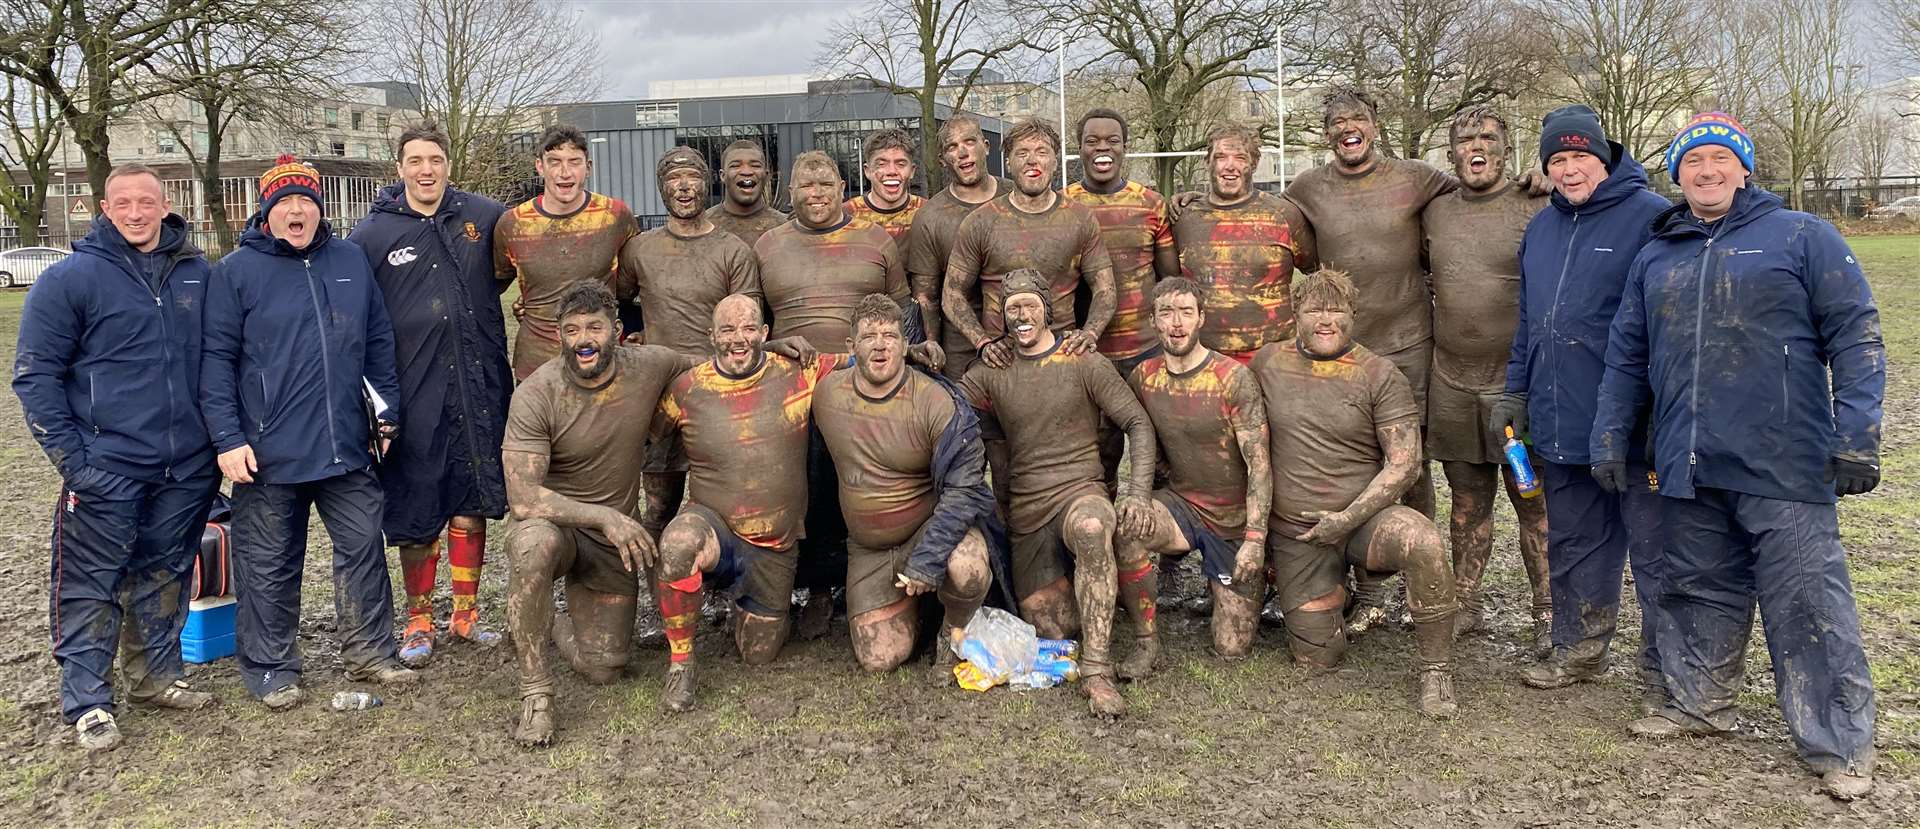 It was mud, sweat and cheers for Medway at Battersea Ironsides